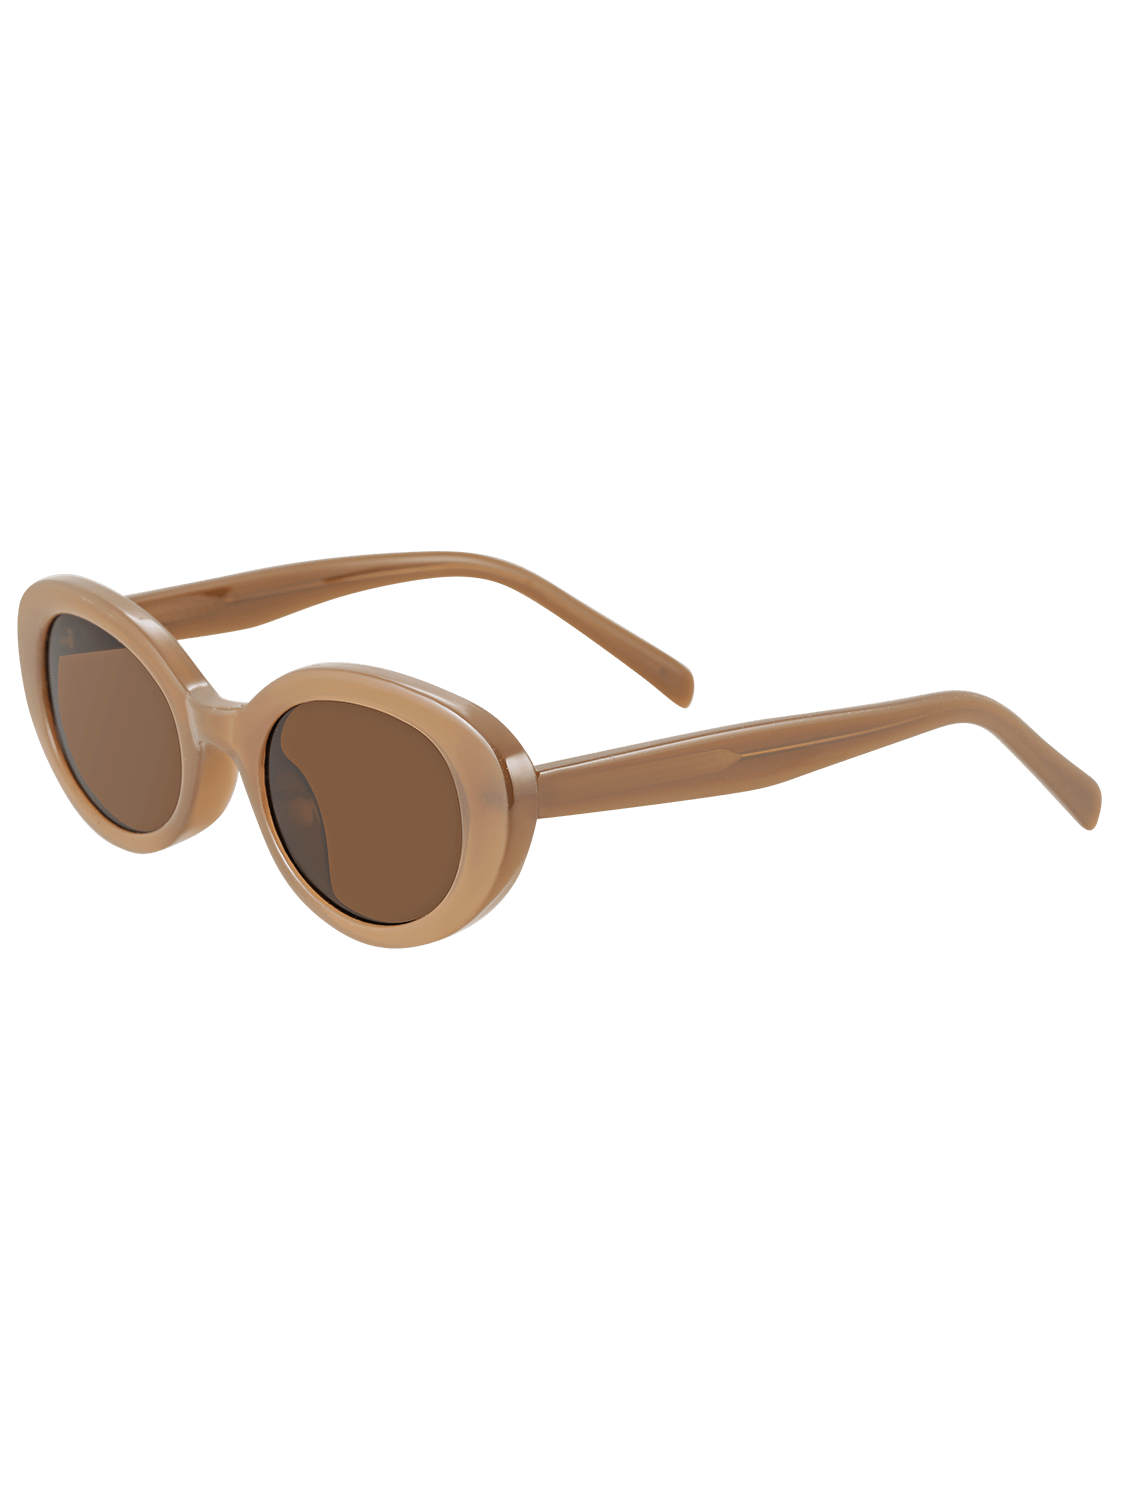 Mocha almond shaped sunglasses from the side view